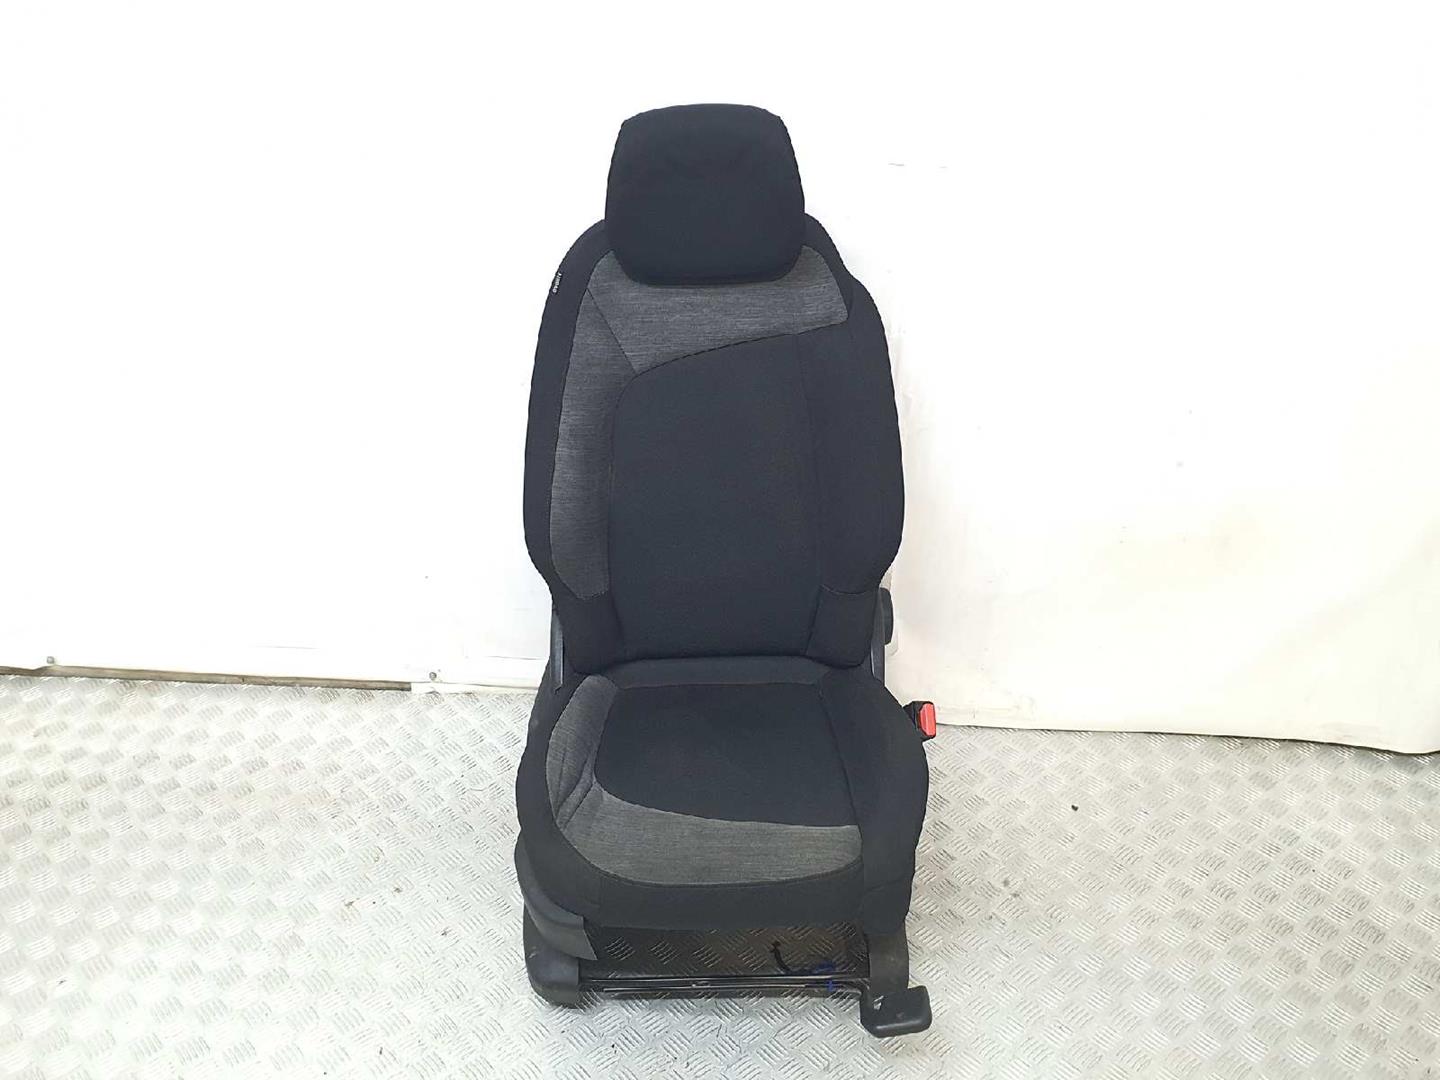 CITROËN C4 Picasso 2 generation (2013-2018) Front Right Seat ASIENTODETELA, MANUAL 19760379